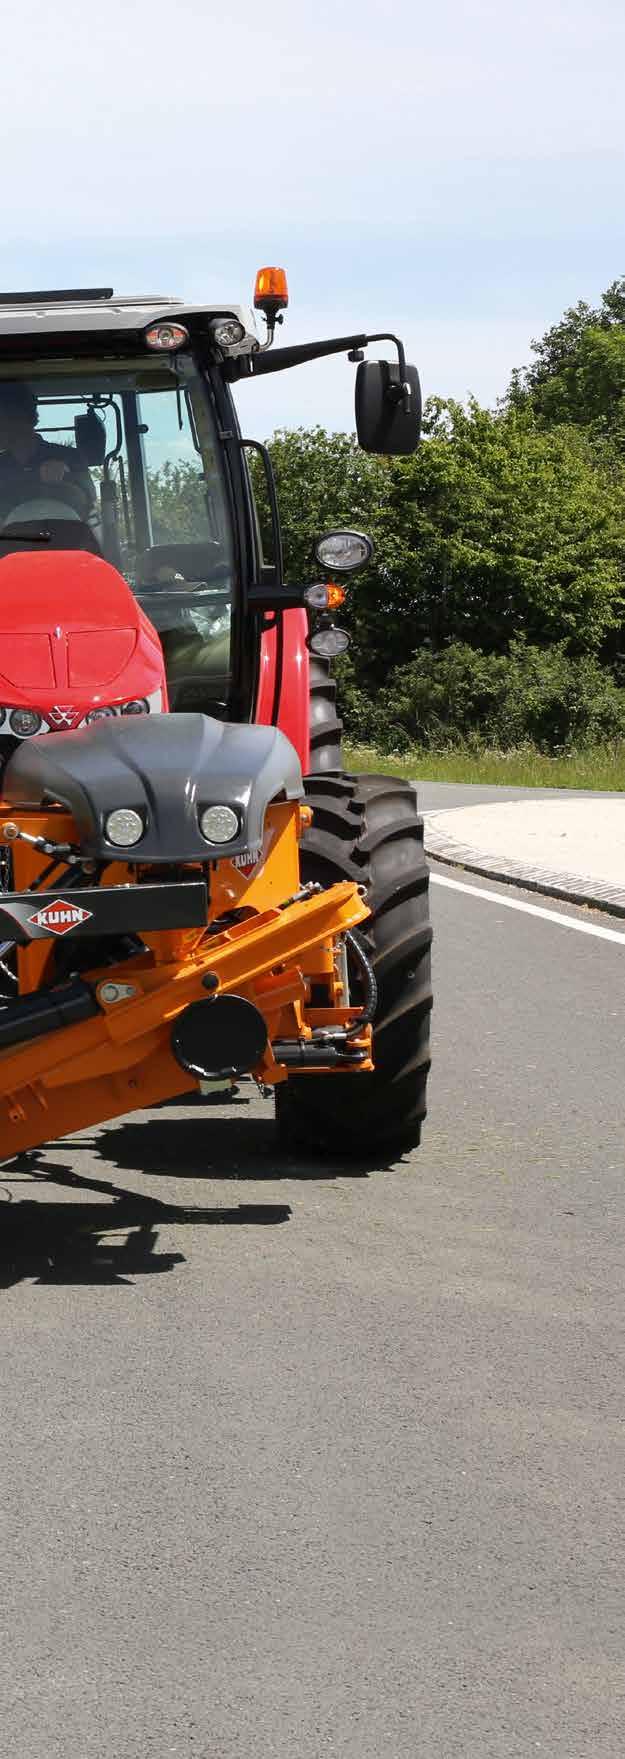 TB 10 TB 100 SELECT TBE 10 TBES 10 TBE 102 TBES 102 SPRING-LONGER PRO A COMPLETE RANGE FOR ROAD VERGES AND FIELD EDGES For several years KUHN has been developing a complete range of landscape